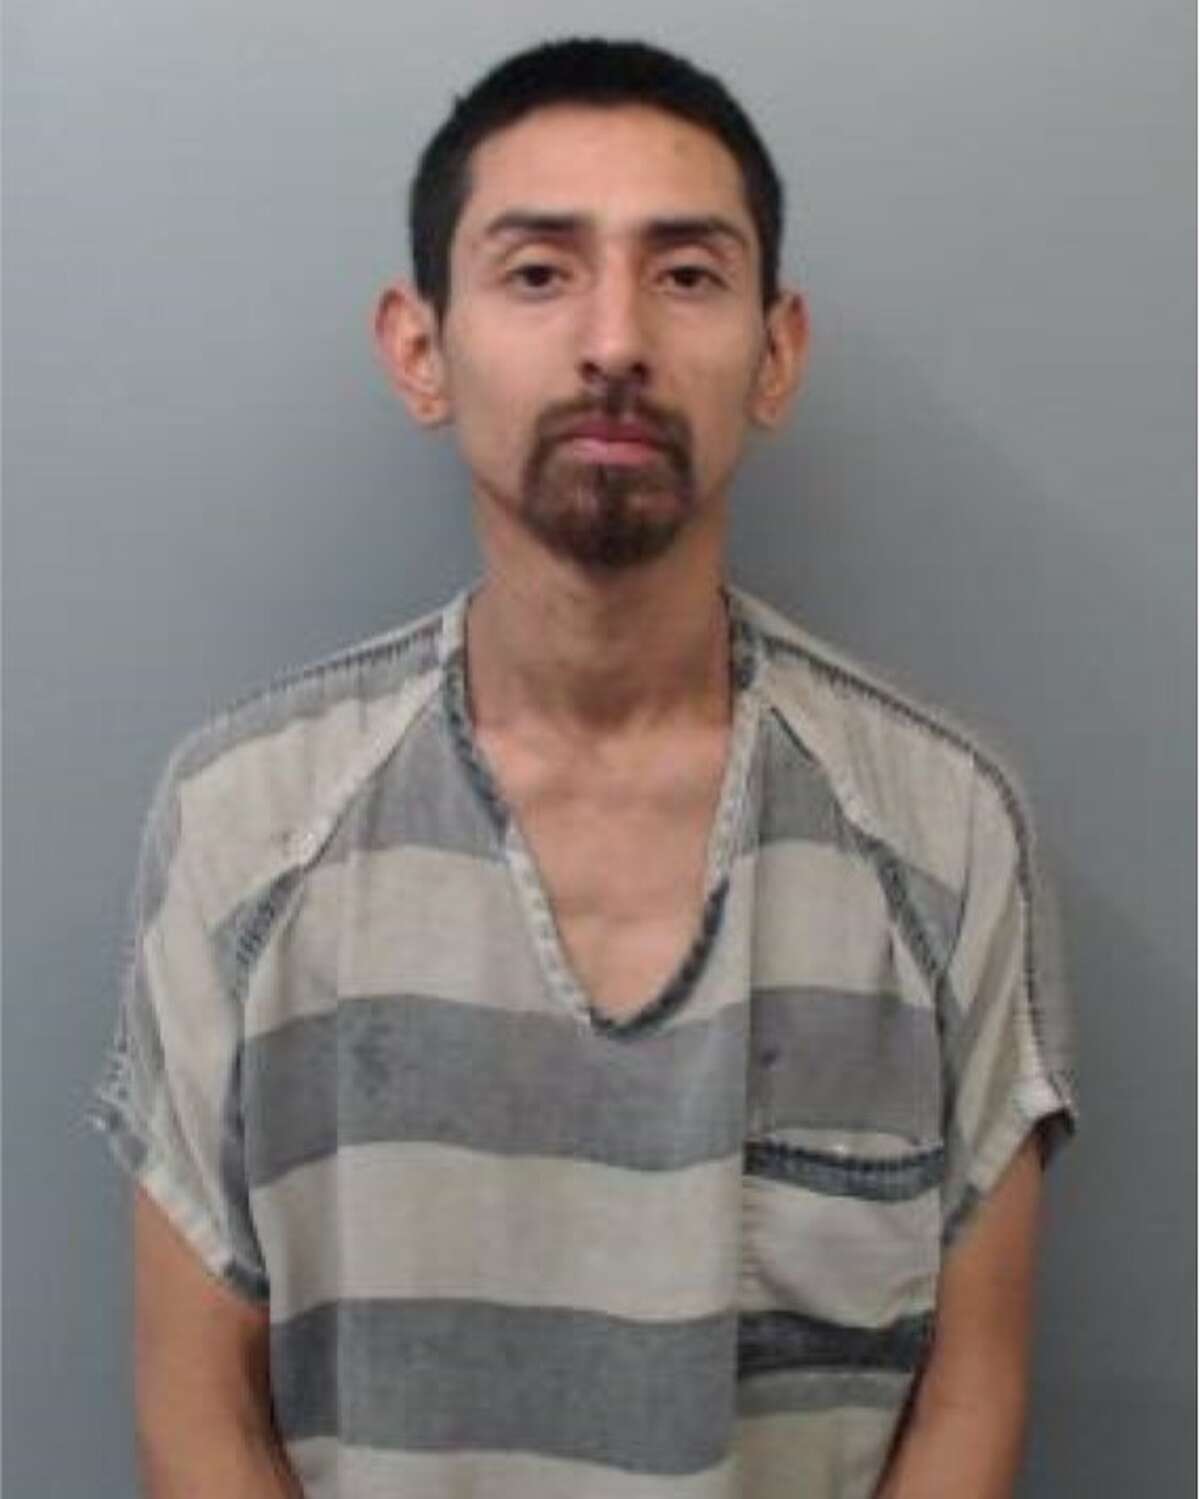 Luis Adrian Ramos, 30, was charged with aggravated robbery. Ramos was also served with a warrant and charged with theft of property with two or more previous convictions.